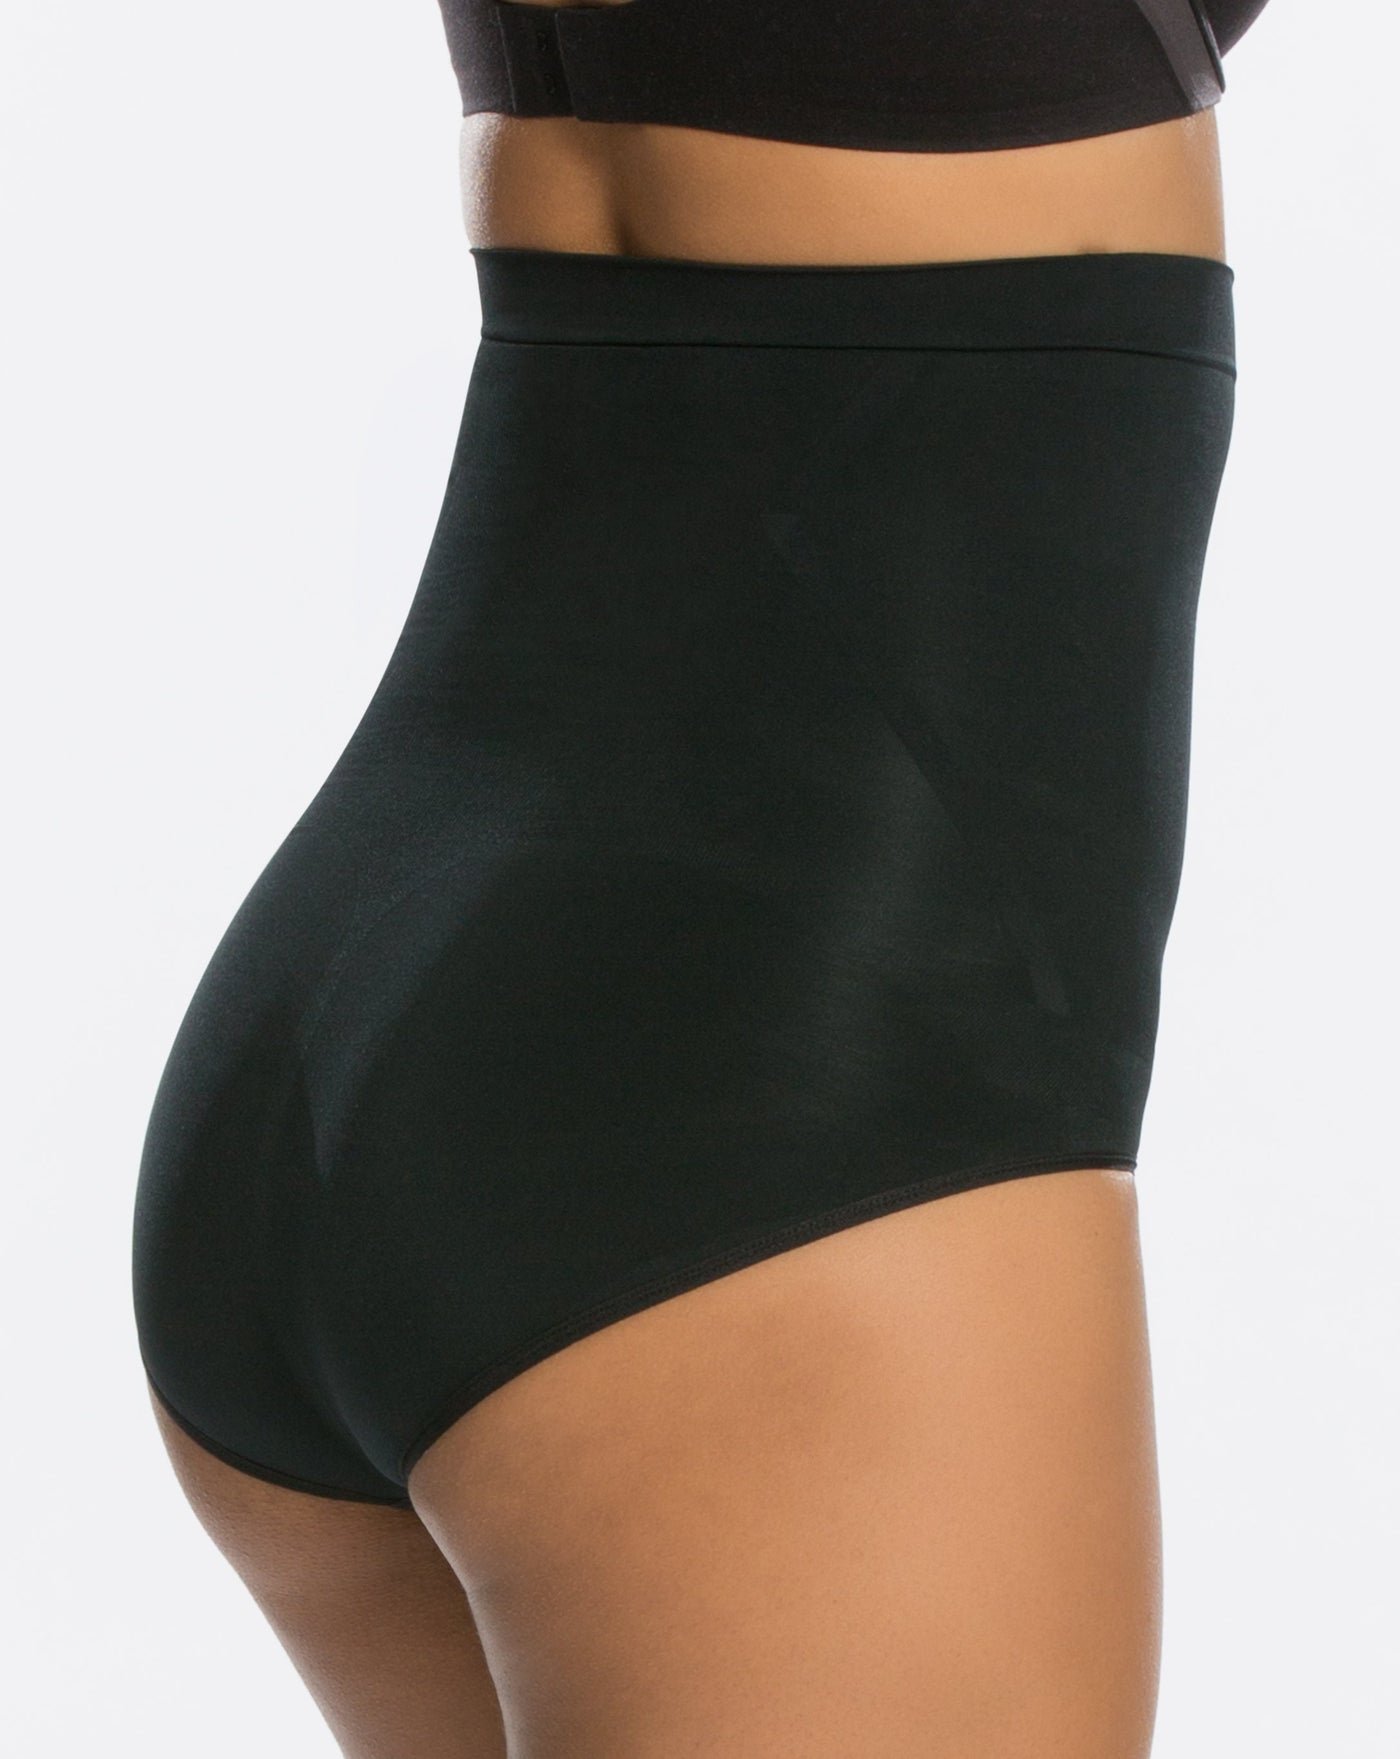 Oncore High-Waisted Brief - Very Black